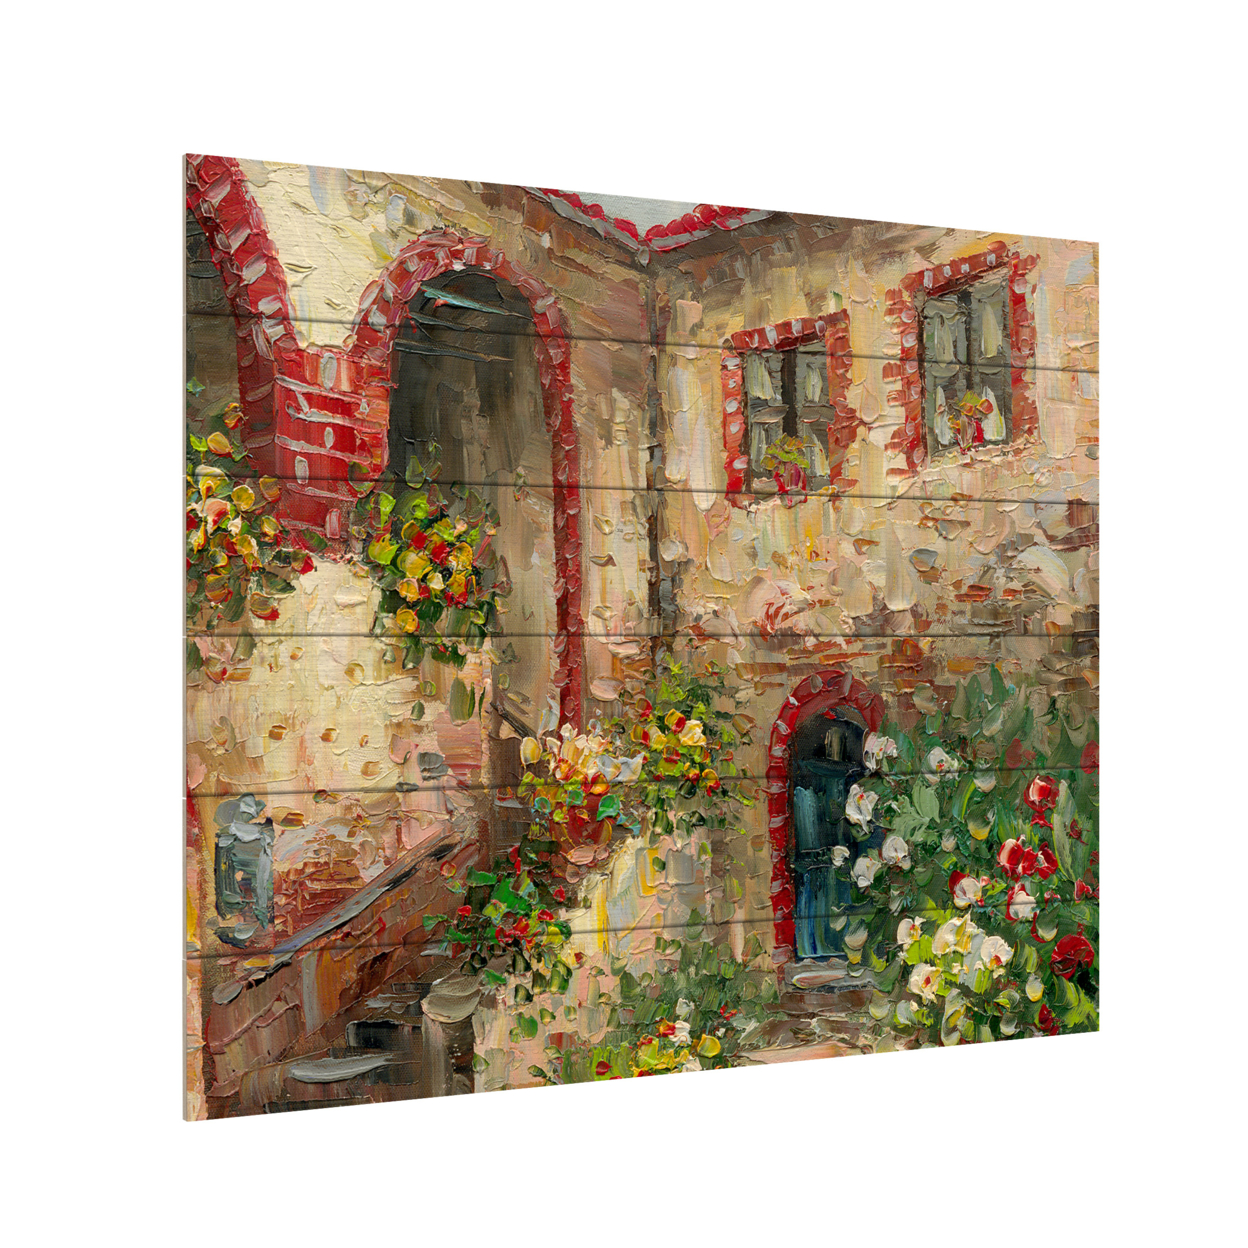 Wooden Slat Art 18 X 22 Inches Titled Tuscany Courtyard Ready To Hang Home Decor Picture